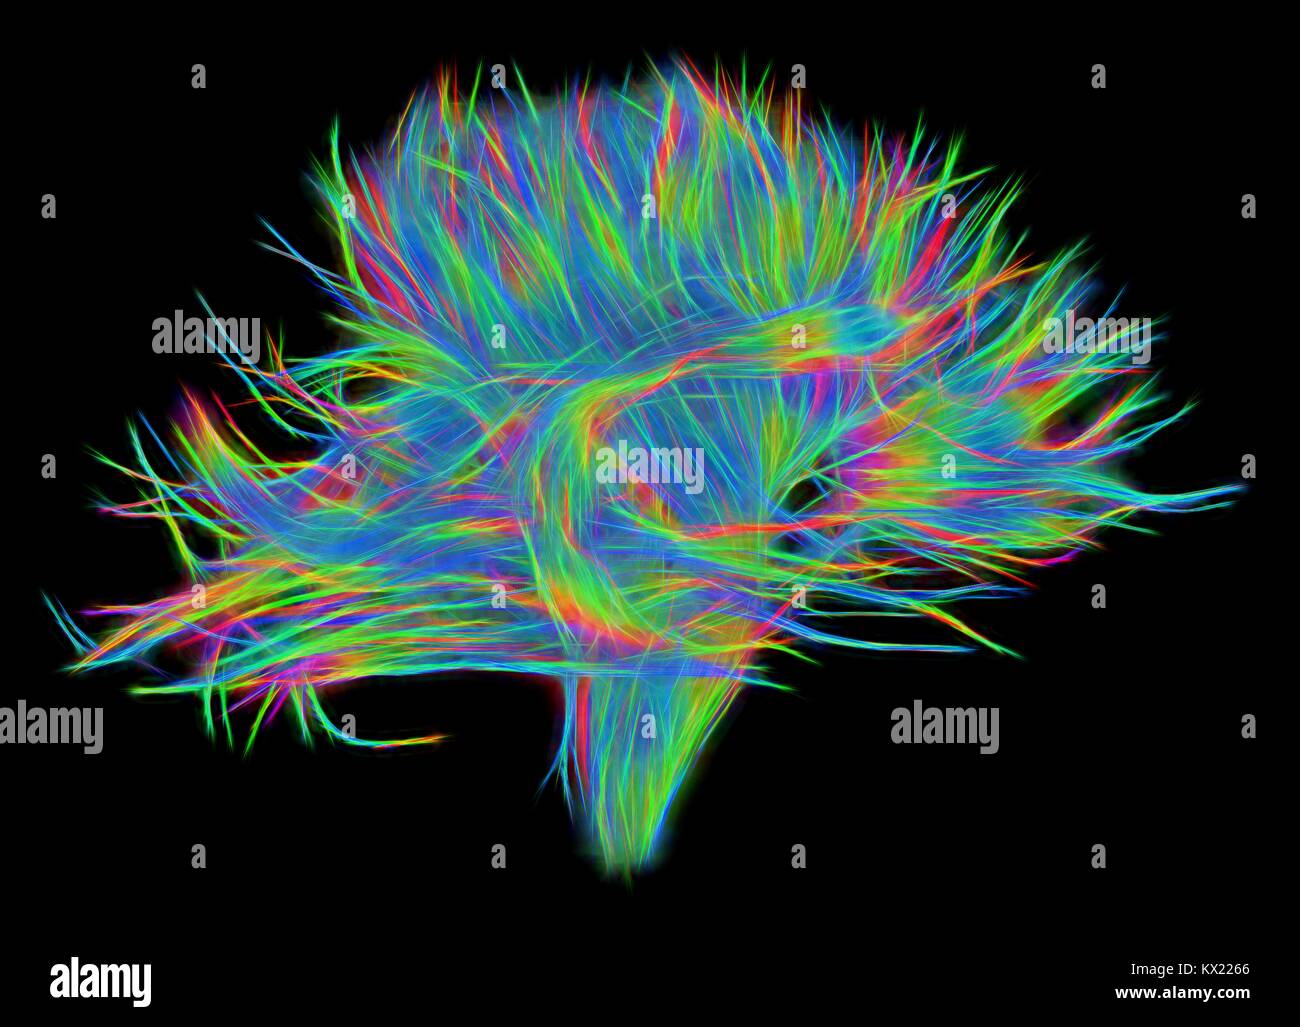 White matter fibres. Computer enhanced 3D diffusion spectral imaging (DSI) scan of the bundles of white matter nerve fibres in the brain. The fibres transmit nerve signals between brain regions and between the brain and the spinal cord. Diffusion spectrum imaging (DSI) is a variant of magnetic resonance imaging (MRI) in which a magnetic field maps the water contained in neuron fibers, thus mapping their criss-crossing patterns. A similar technique called diffusion tensor imaging (DTI) is also used to explore neural data of white matter fibres in the brain. Both methods allow mapping of their Stock Photo